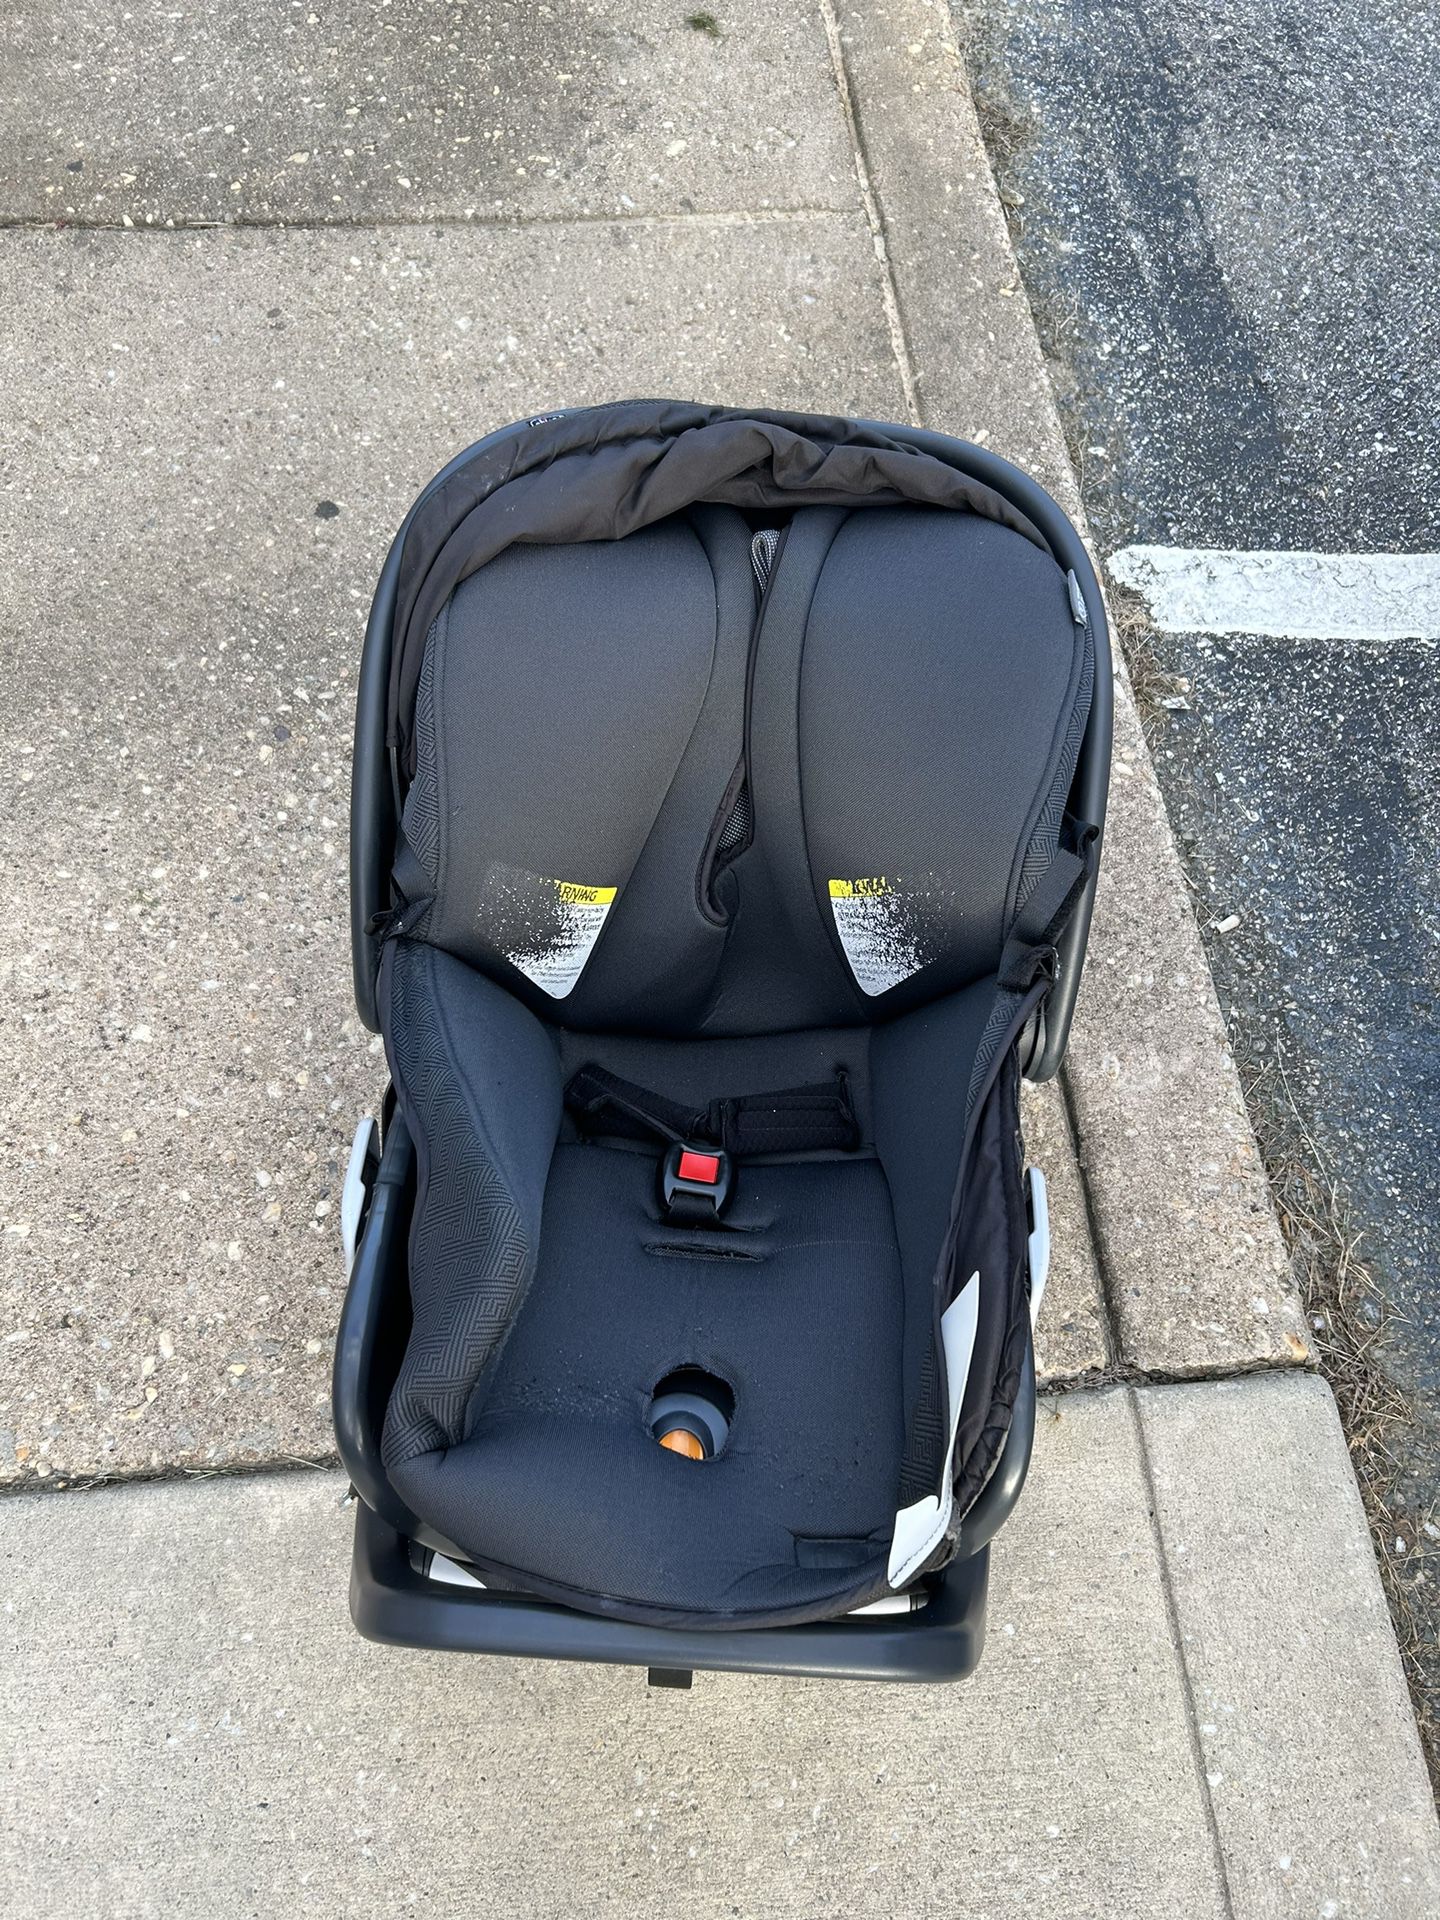 Chicco Brand Infant Car Seat W/ Base